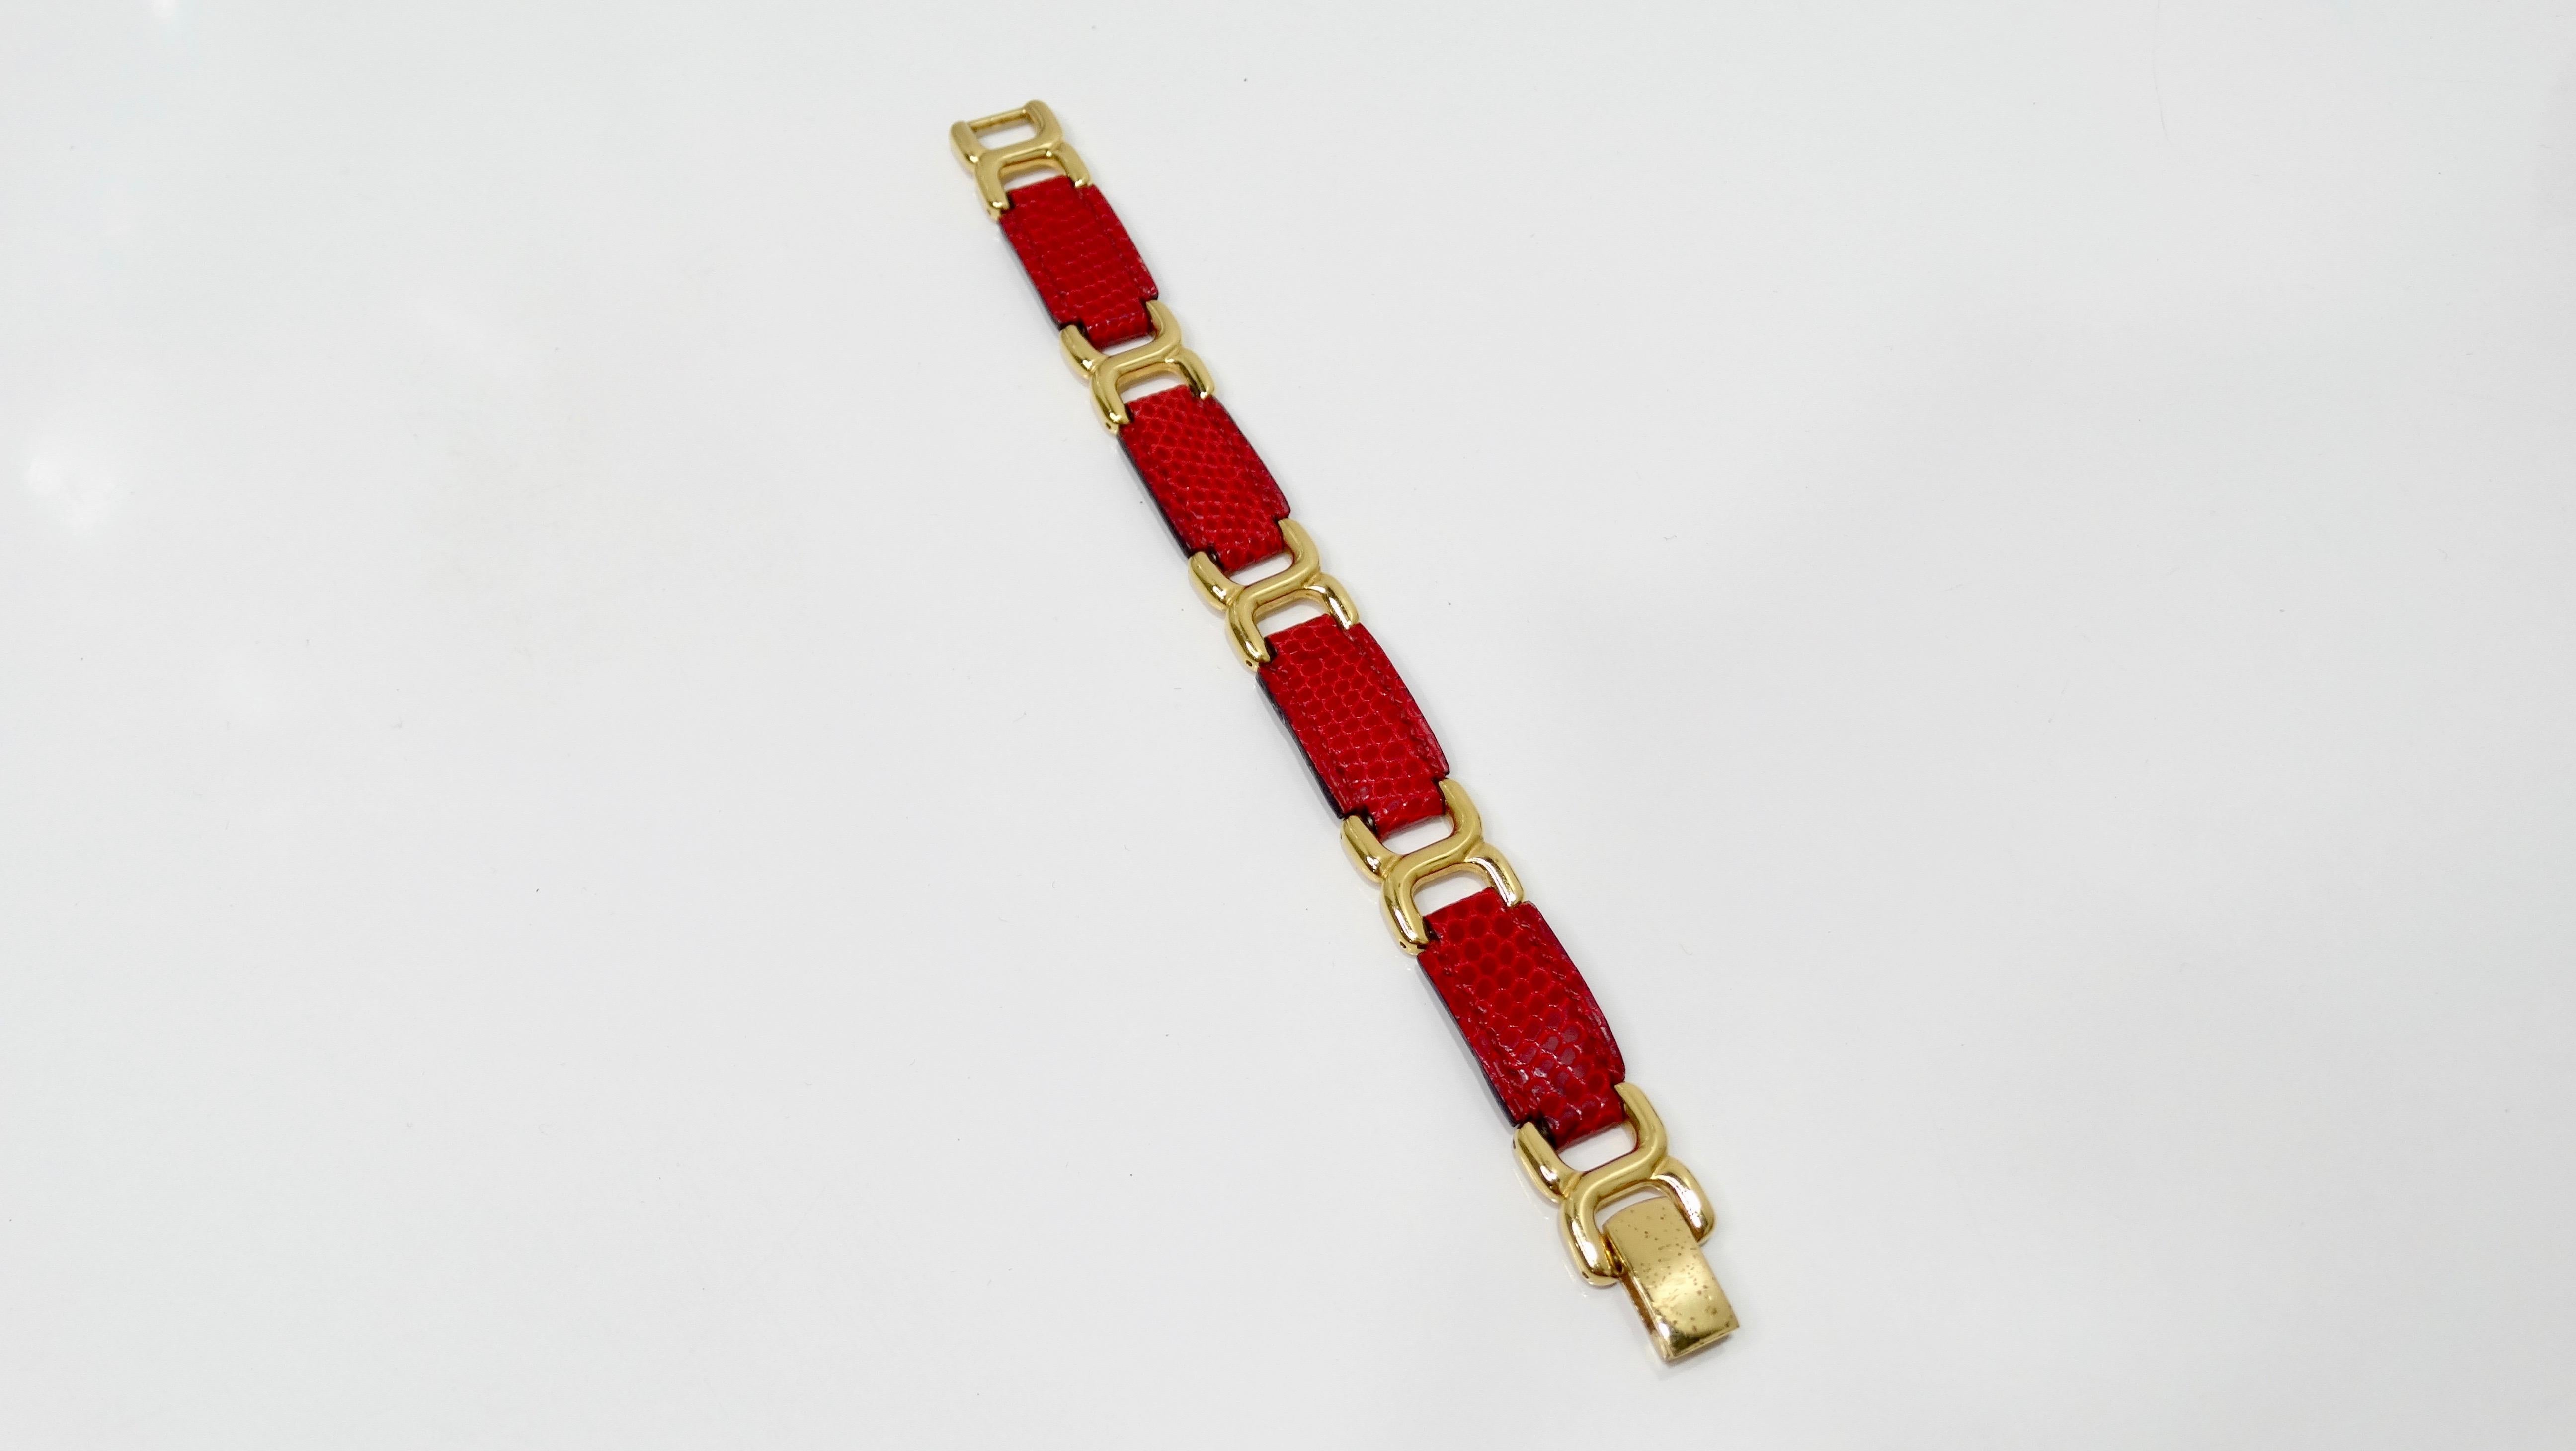 Elevate your bracelet collection with this Hermés Place Beauvau bracelet! Circa 21st century, this bracelet is plated in 18k gold and is crafted from lipstick red lizard skin. Features stirrup style links and a fold over closure. Bracelet is signed